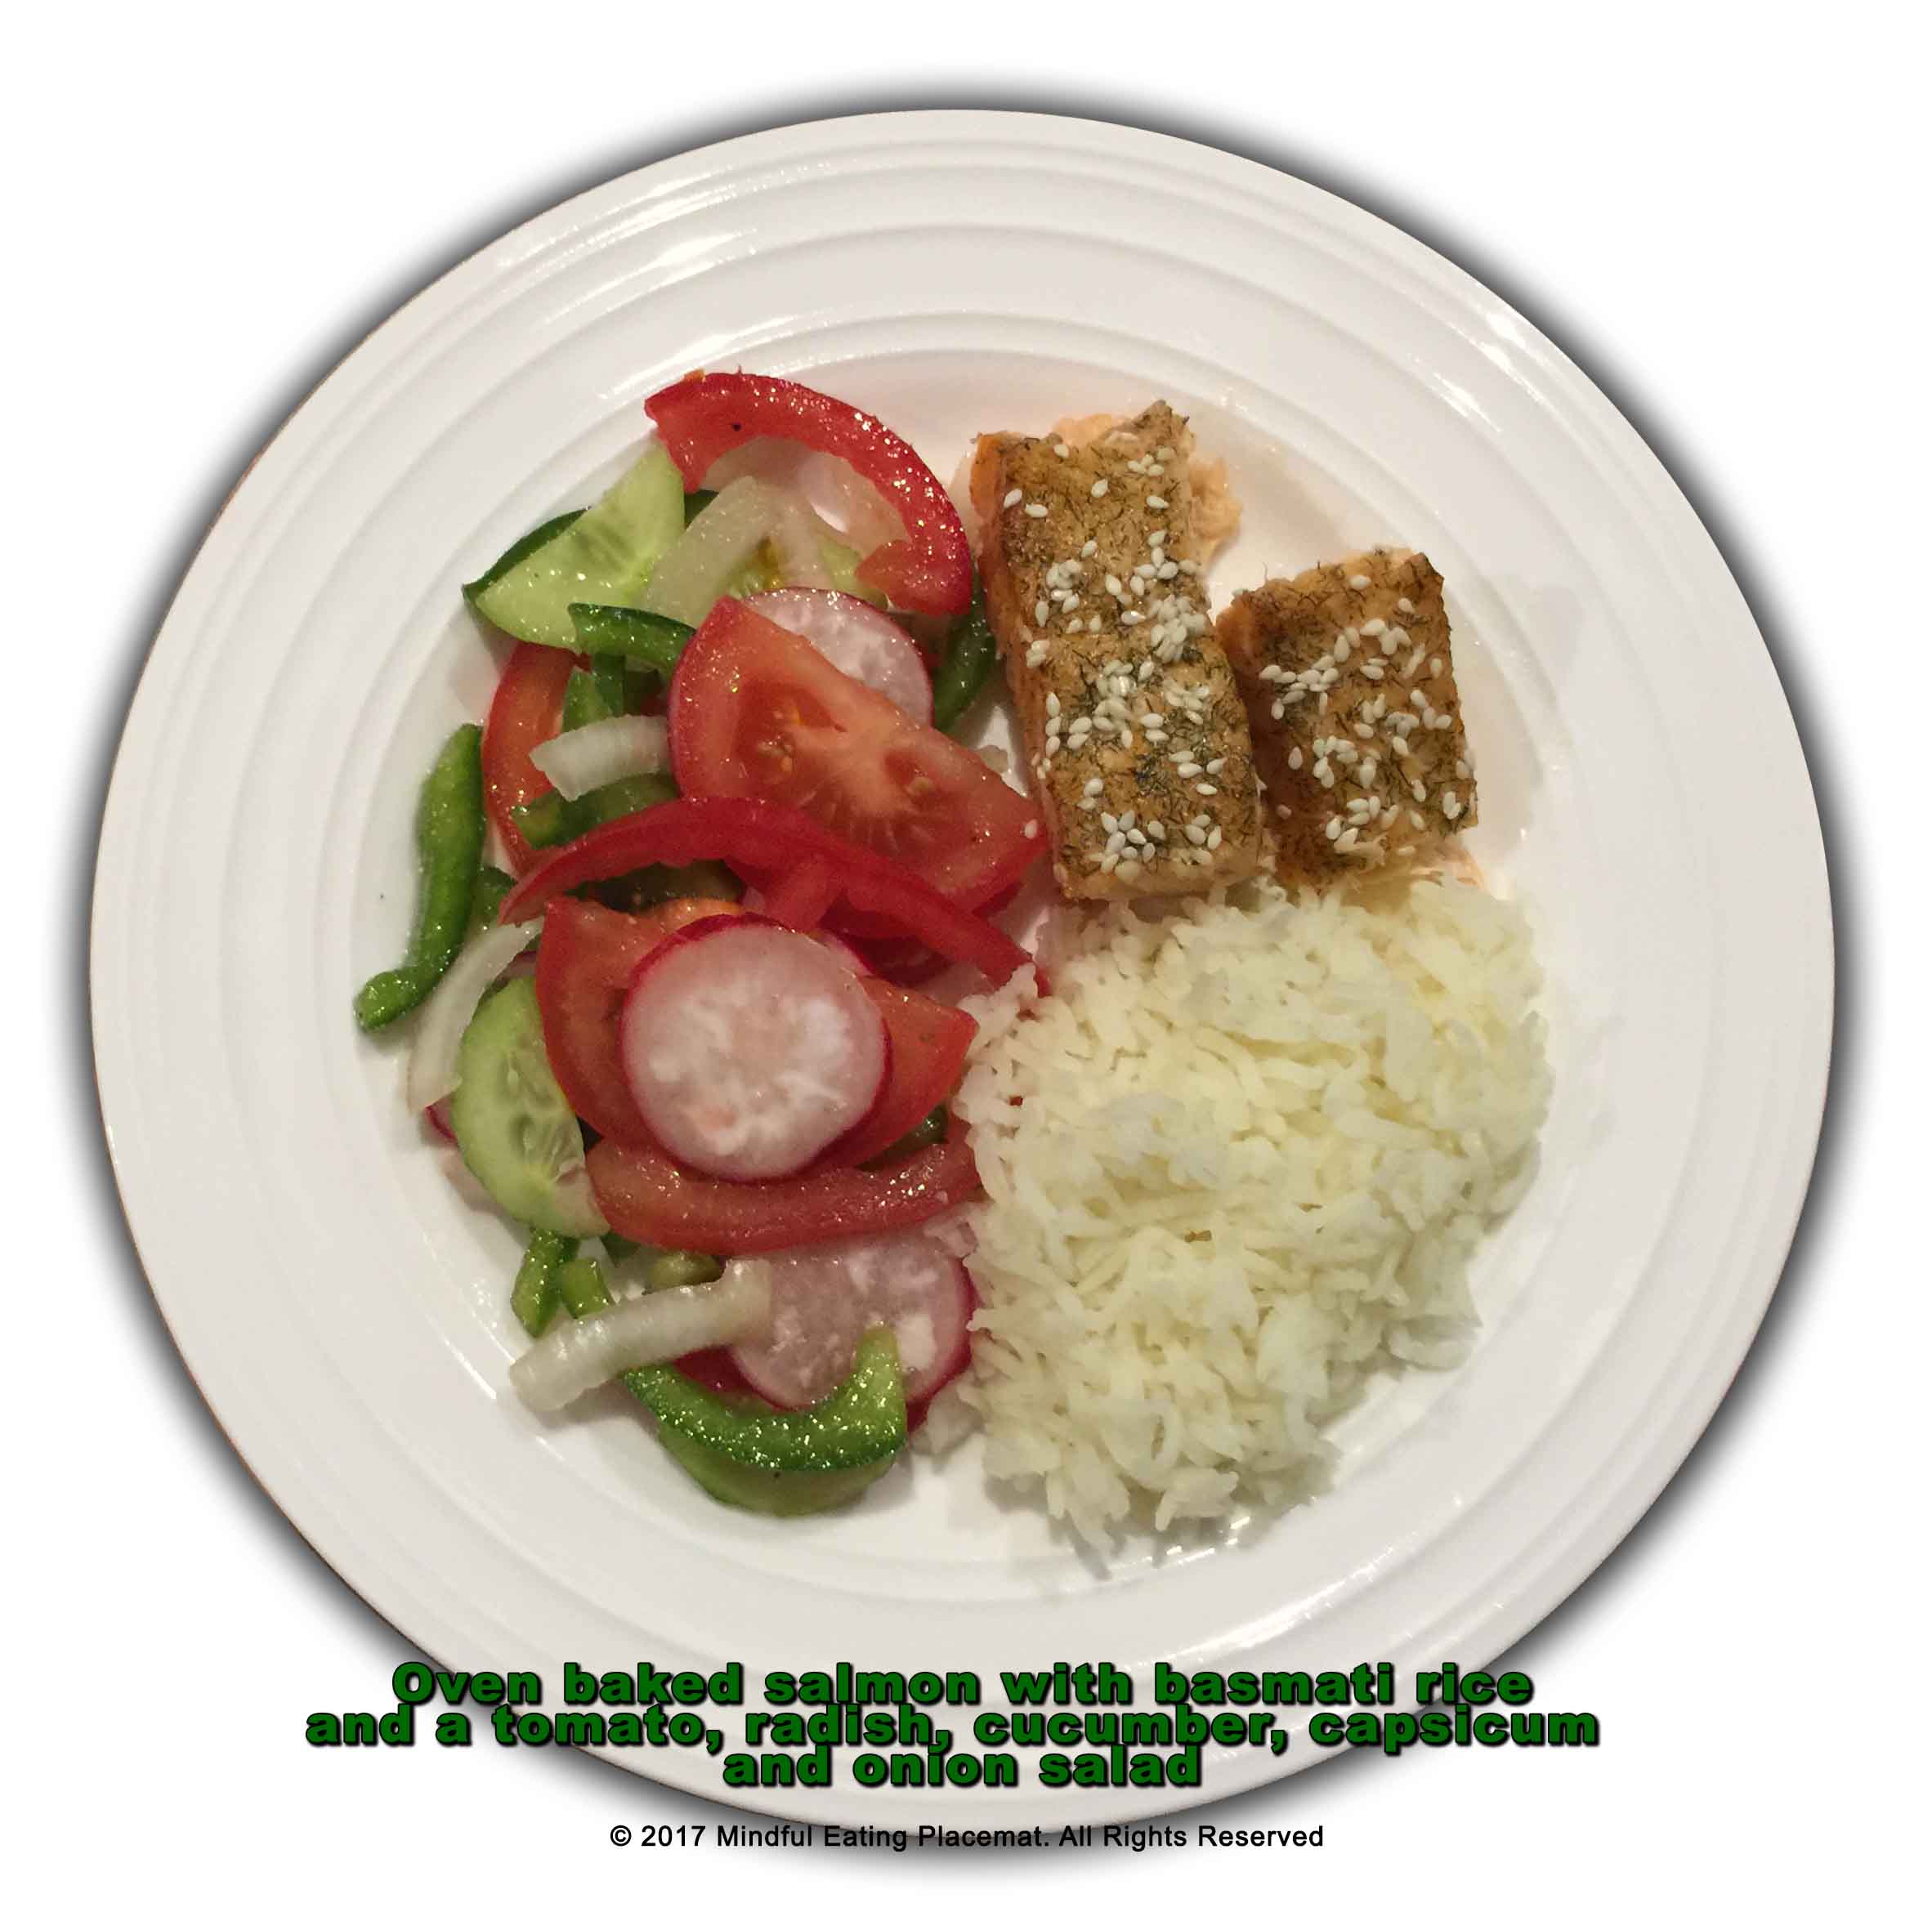 Oven baked salmon with basmati rice and salad